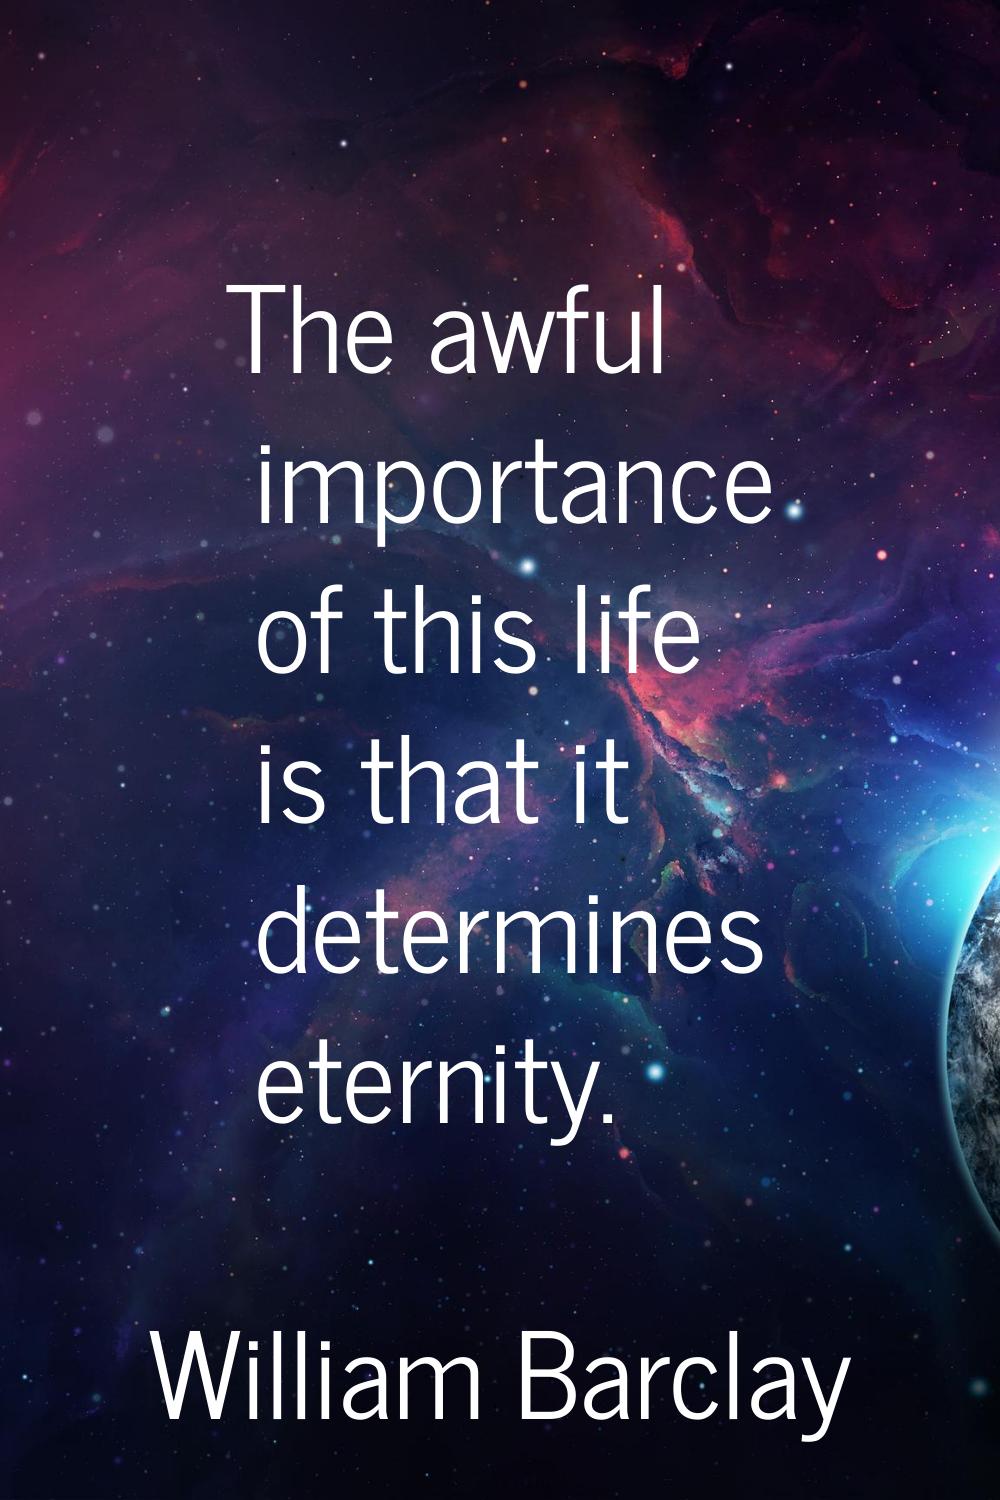 The awful importance of this life is that it determines eternity.